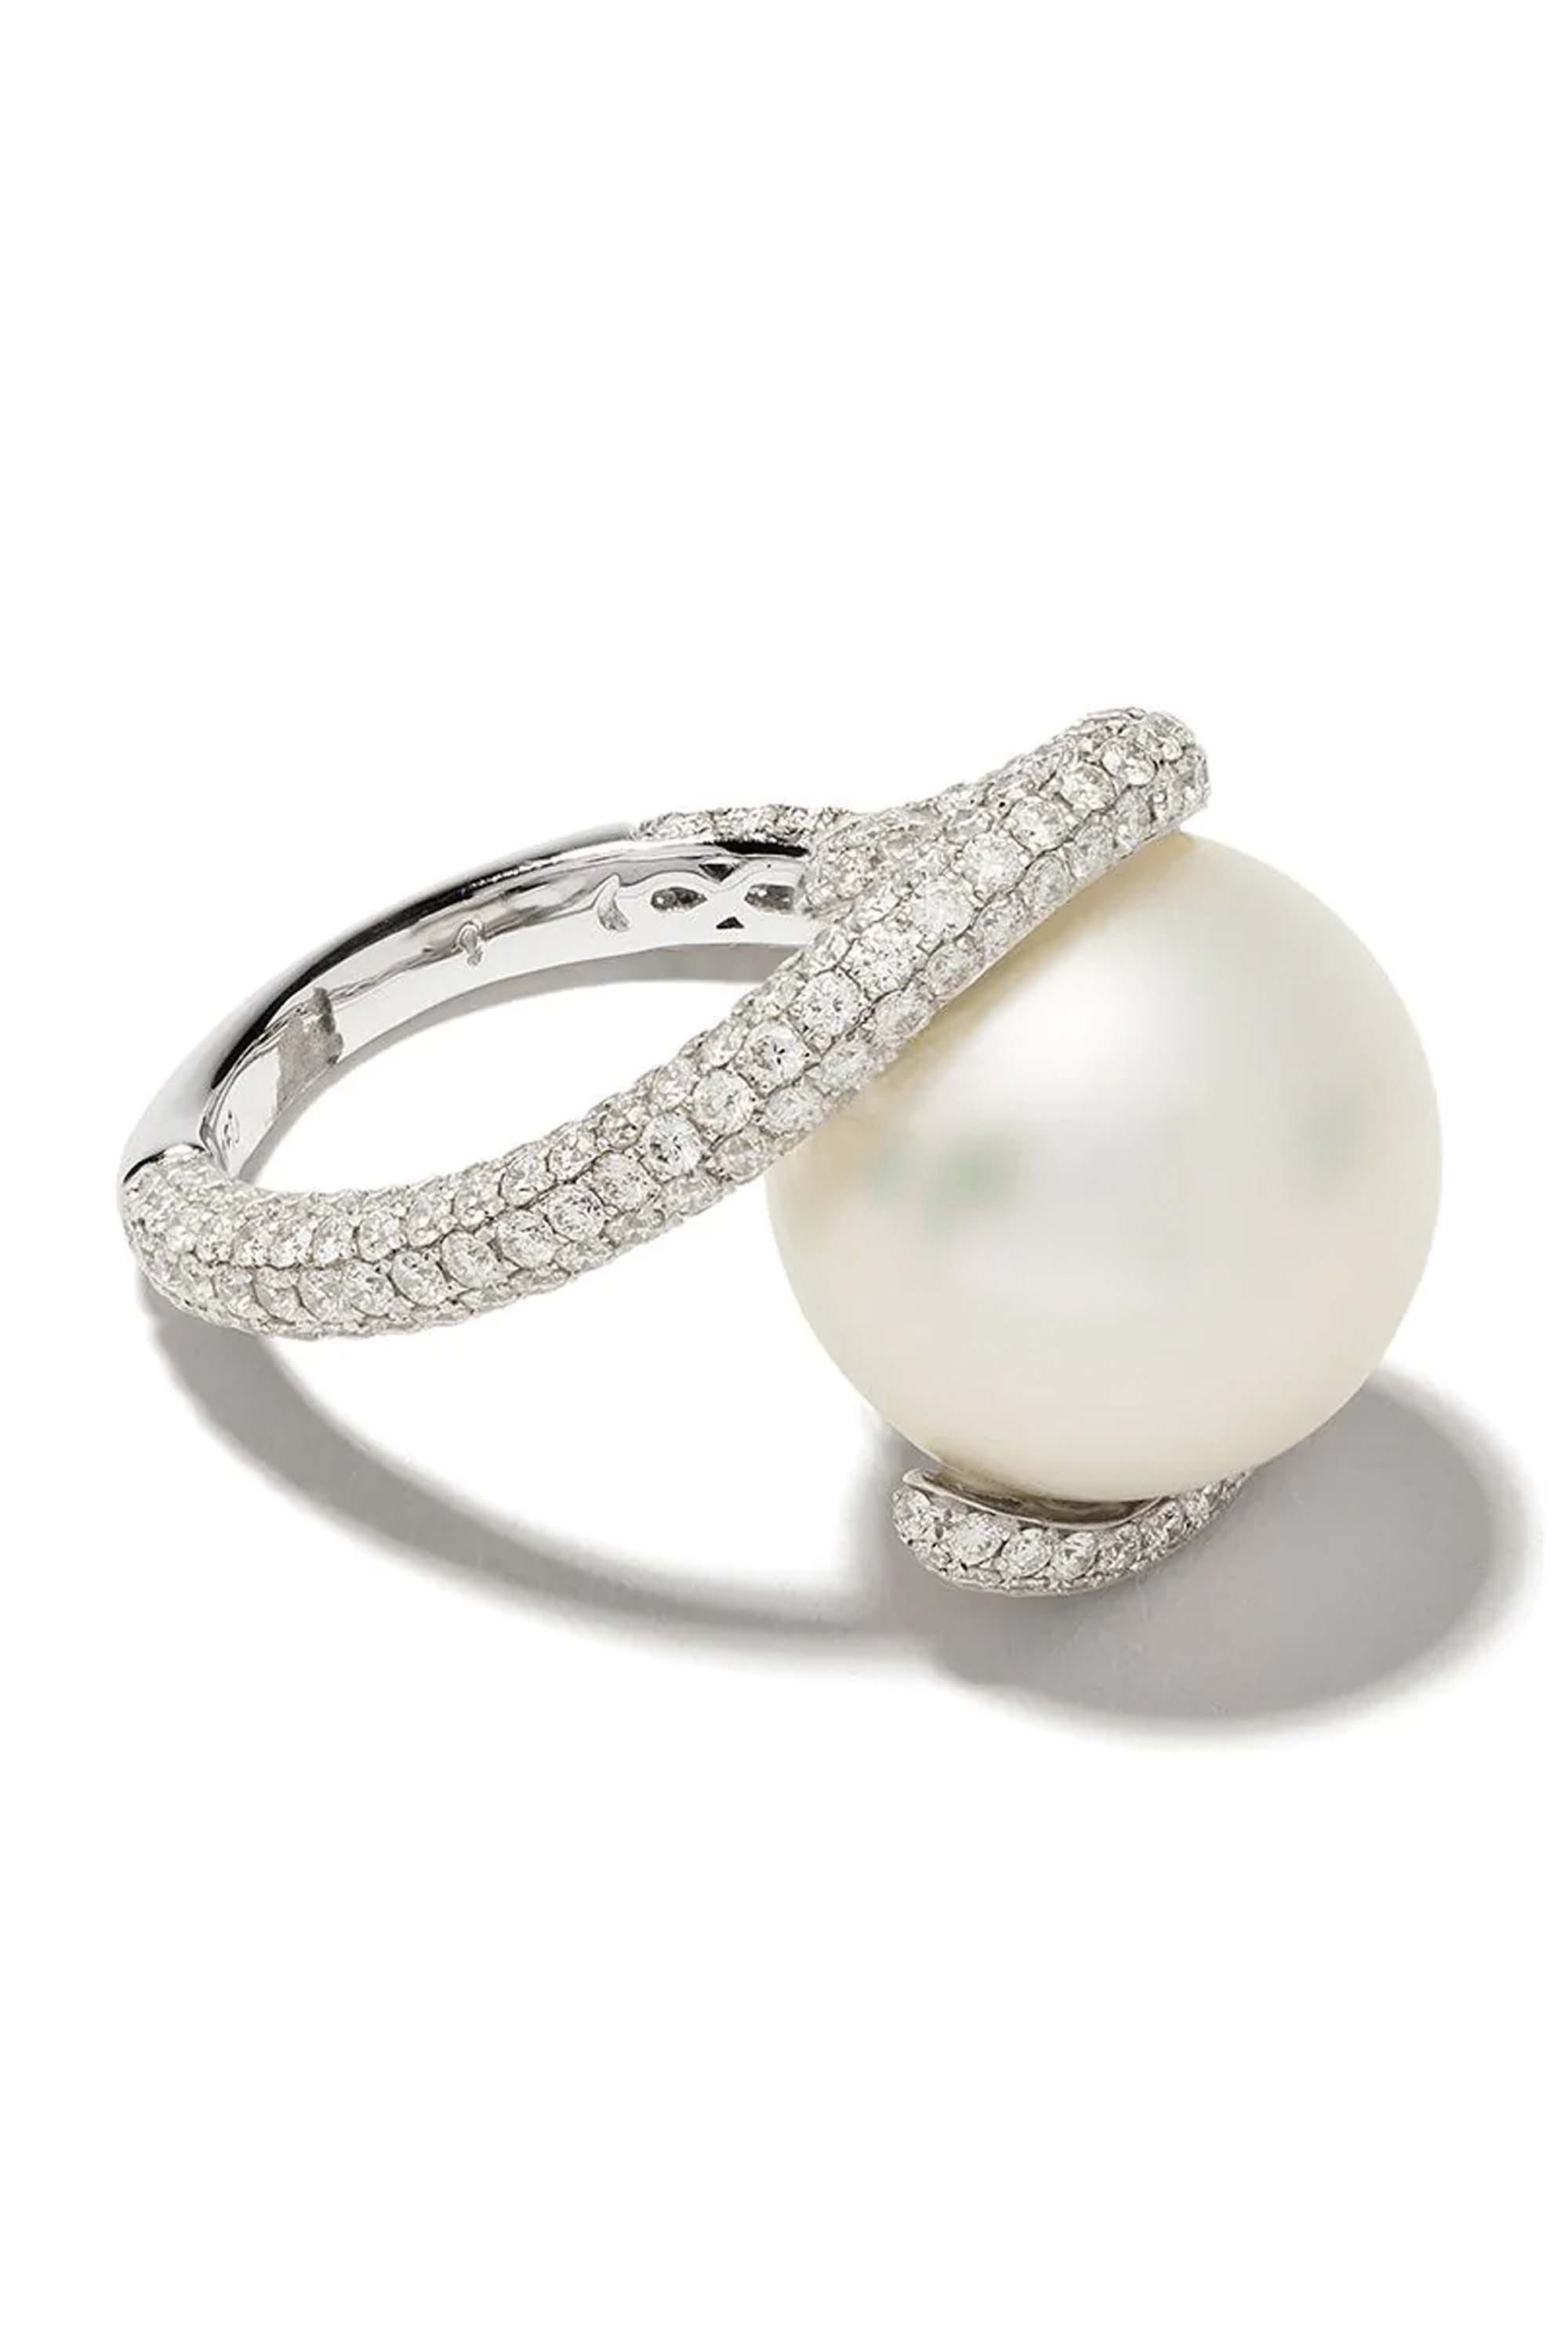 Pearl Engagement Rings: The Complete Guide